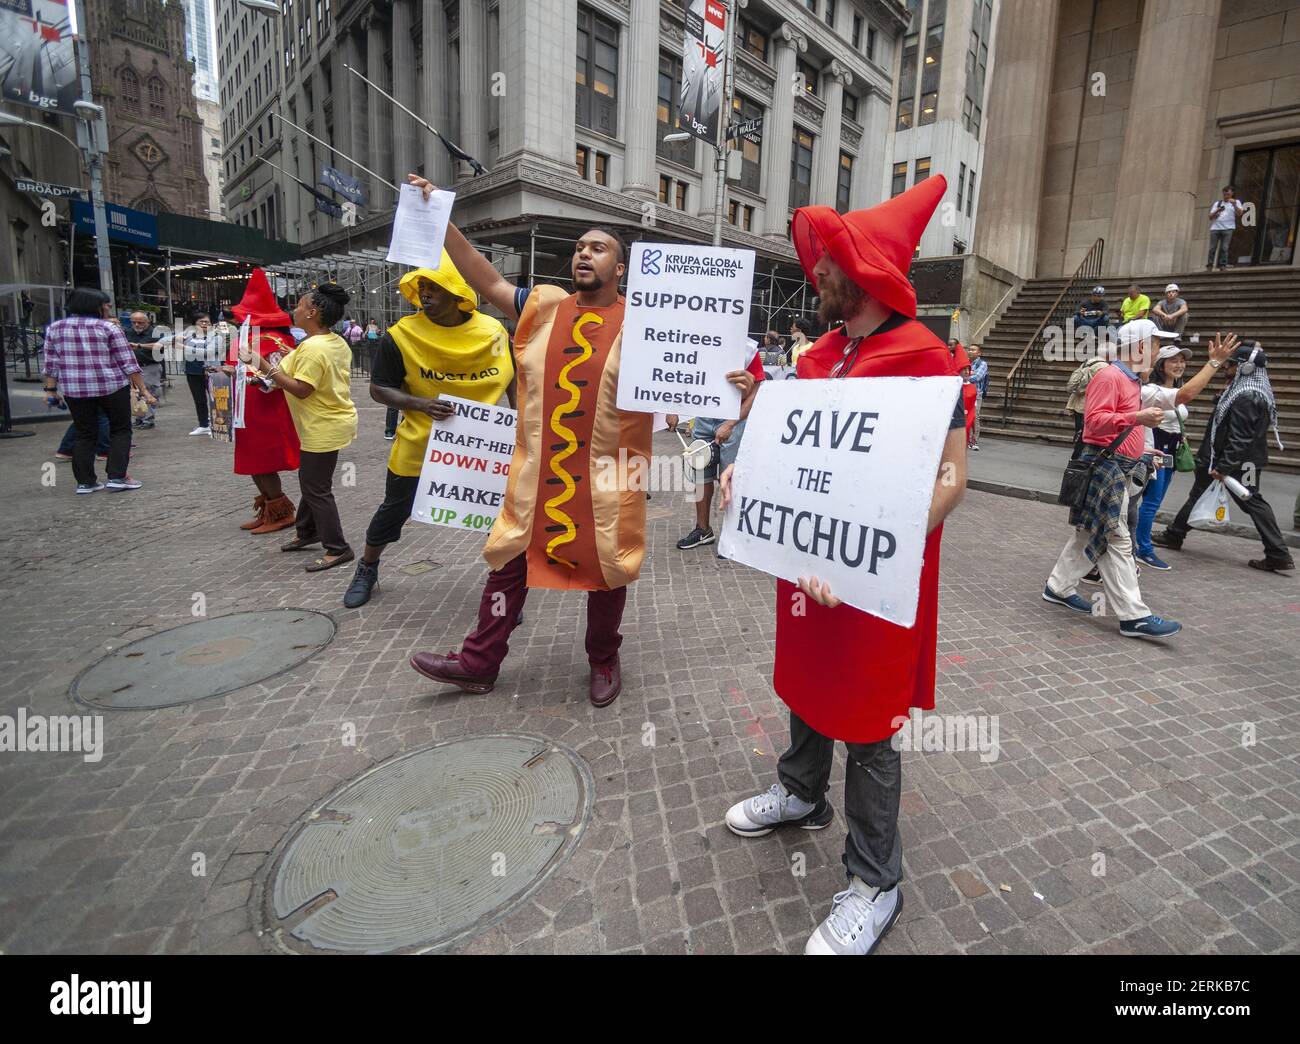 Protesters from Krupa Global Investments dressed as iconic ketchup and mustard bottles protest on Wednesday, September 12, 2018 the management of the Kraft Heinz Company by Berkshire Hathaway and 3G Capital, fearful that the investors are abandoning the company. Krupa wants the company, which has seen its share price drop, to take a number of steps to ensure a fair return to investors even if Kraft Heinz has to be taken private. KGI owns approximately $100 million of Kraft Heinz stock. (ÂPhoto by Richard B. Levine) Stock Photo